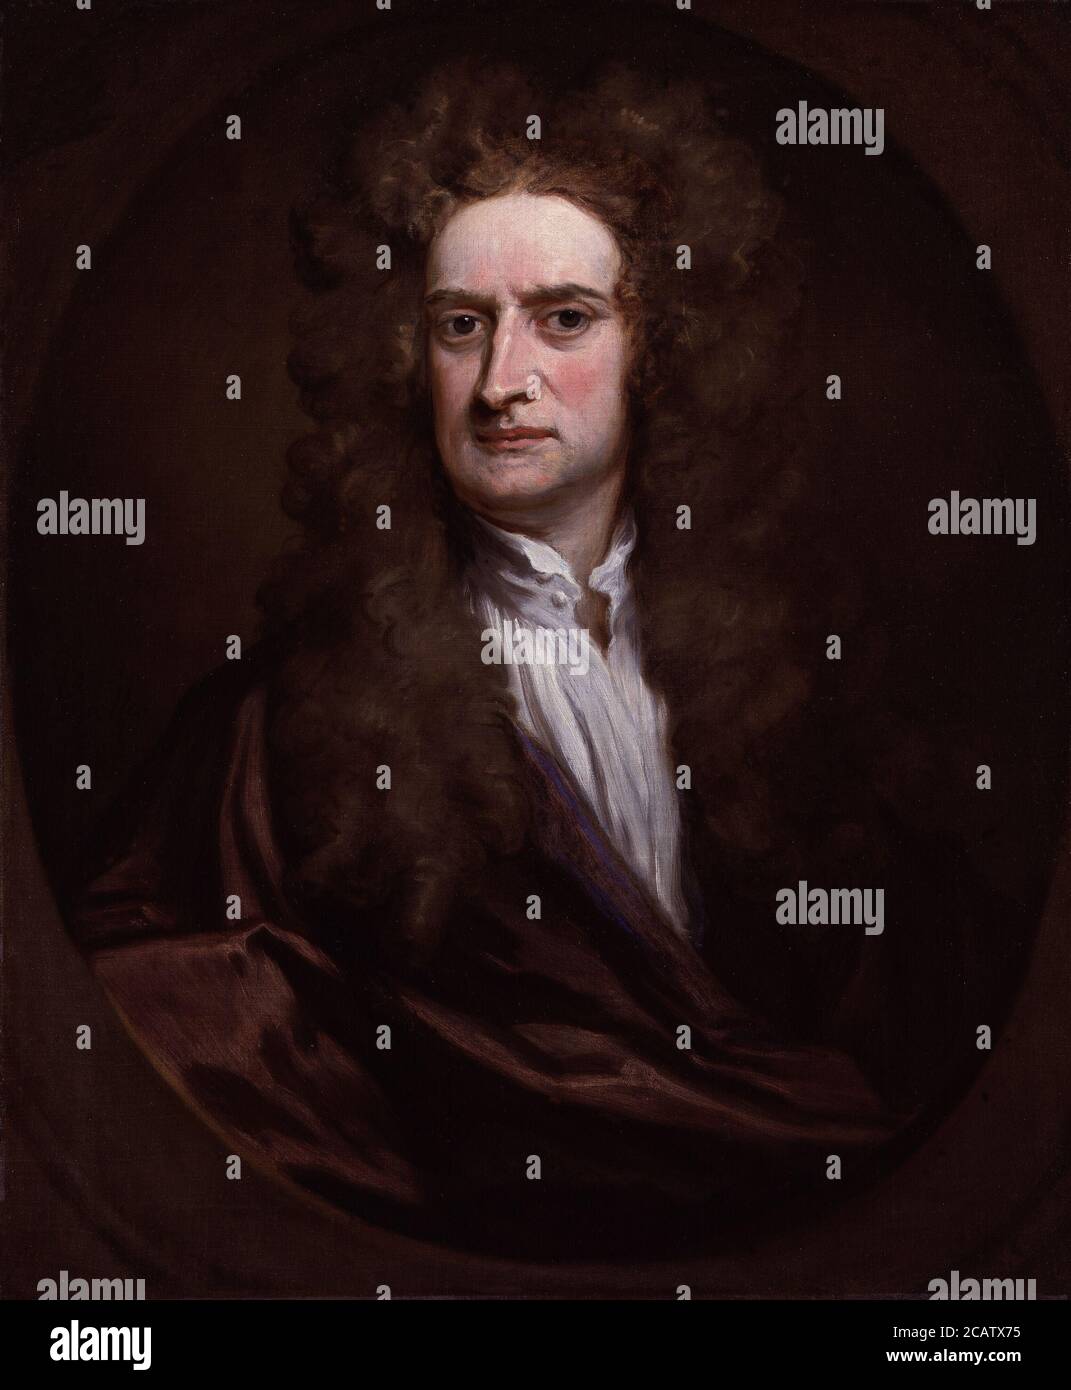 Portrait of Sir Isaac Newton, English physicist, mathematician, astronomer, philosopher by Sir Godfrey Kneller (English school) 1702. Newton's (1643-1727) discoveries were prolific and exerted a huge influence on science and thought. His theories of gravity and his three laws of motion were outlined in his greatest work, Philosophiae Naturalis Principia Mathematica, (1687) and he is credited with discovering differential calculus. He also formulated theories regarding optics and the nature of light that led to him building the first reflecting telescope. Knighted by Queen Anne in 1705, Newton Stock Photo